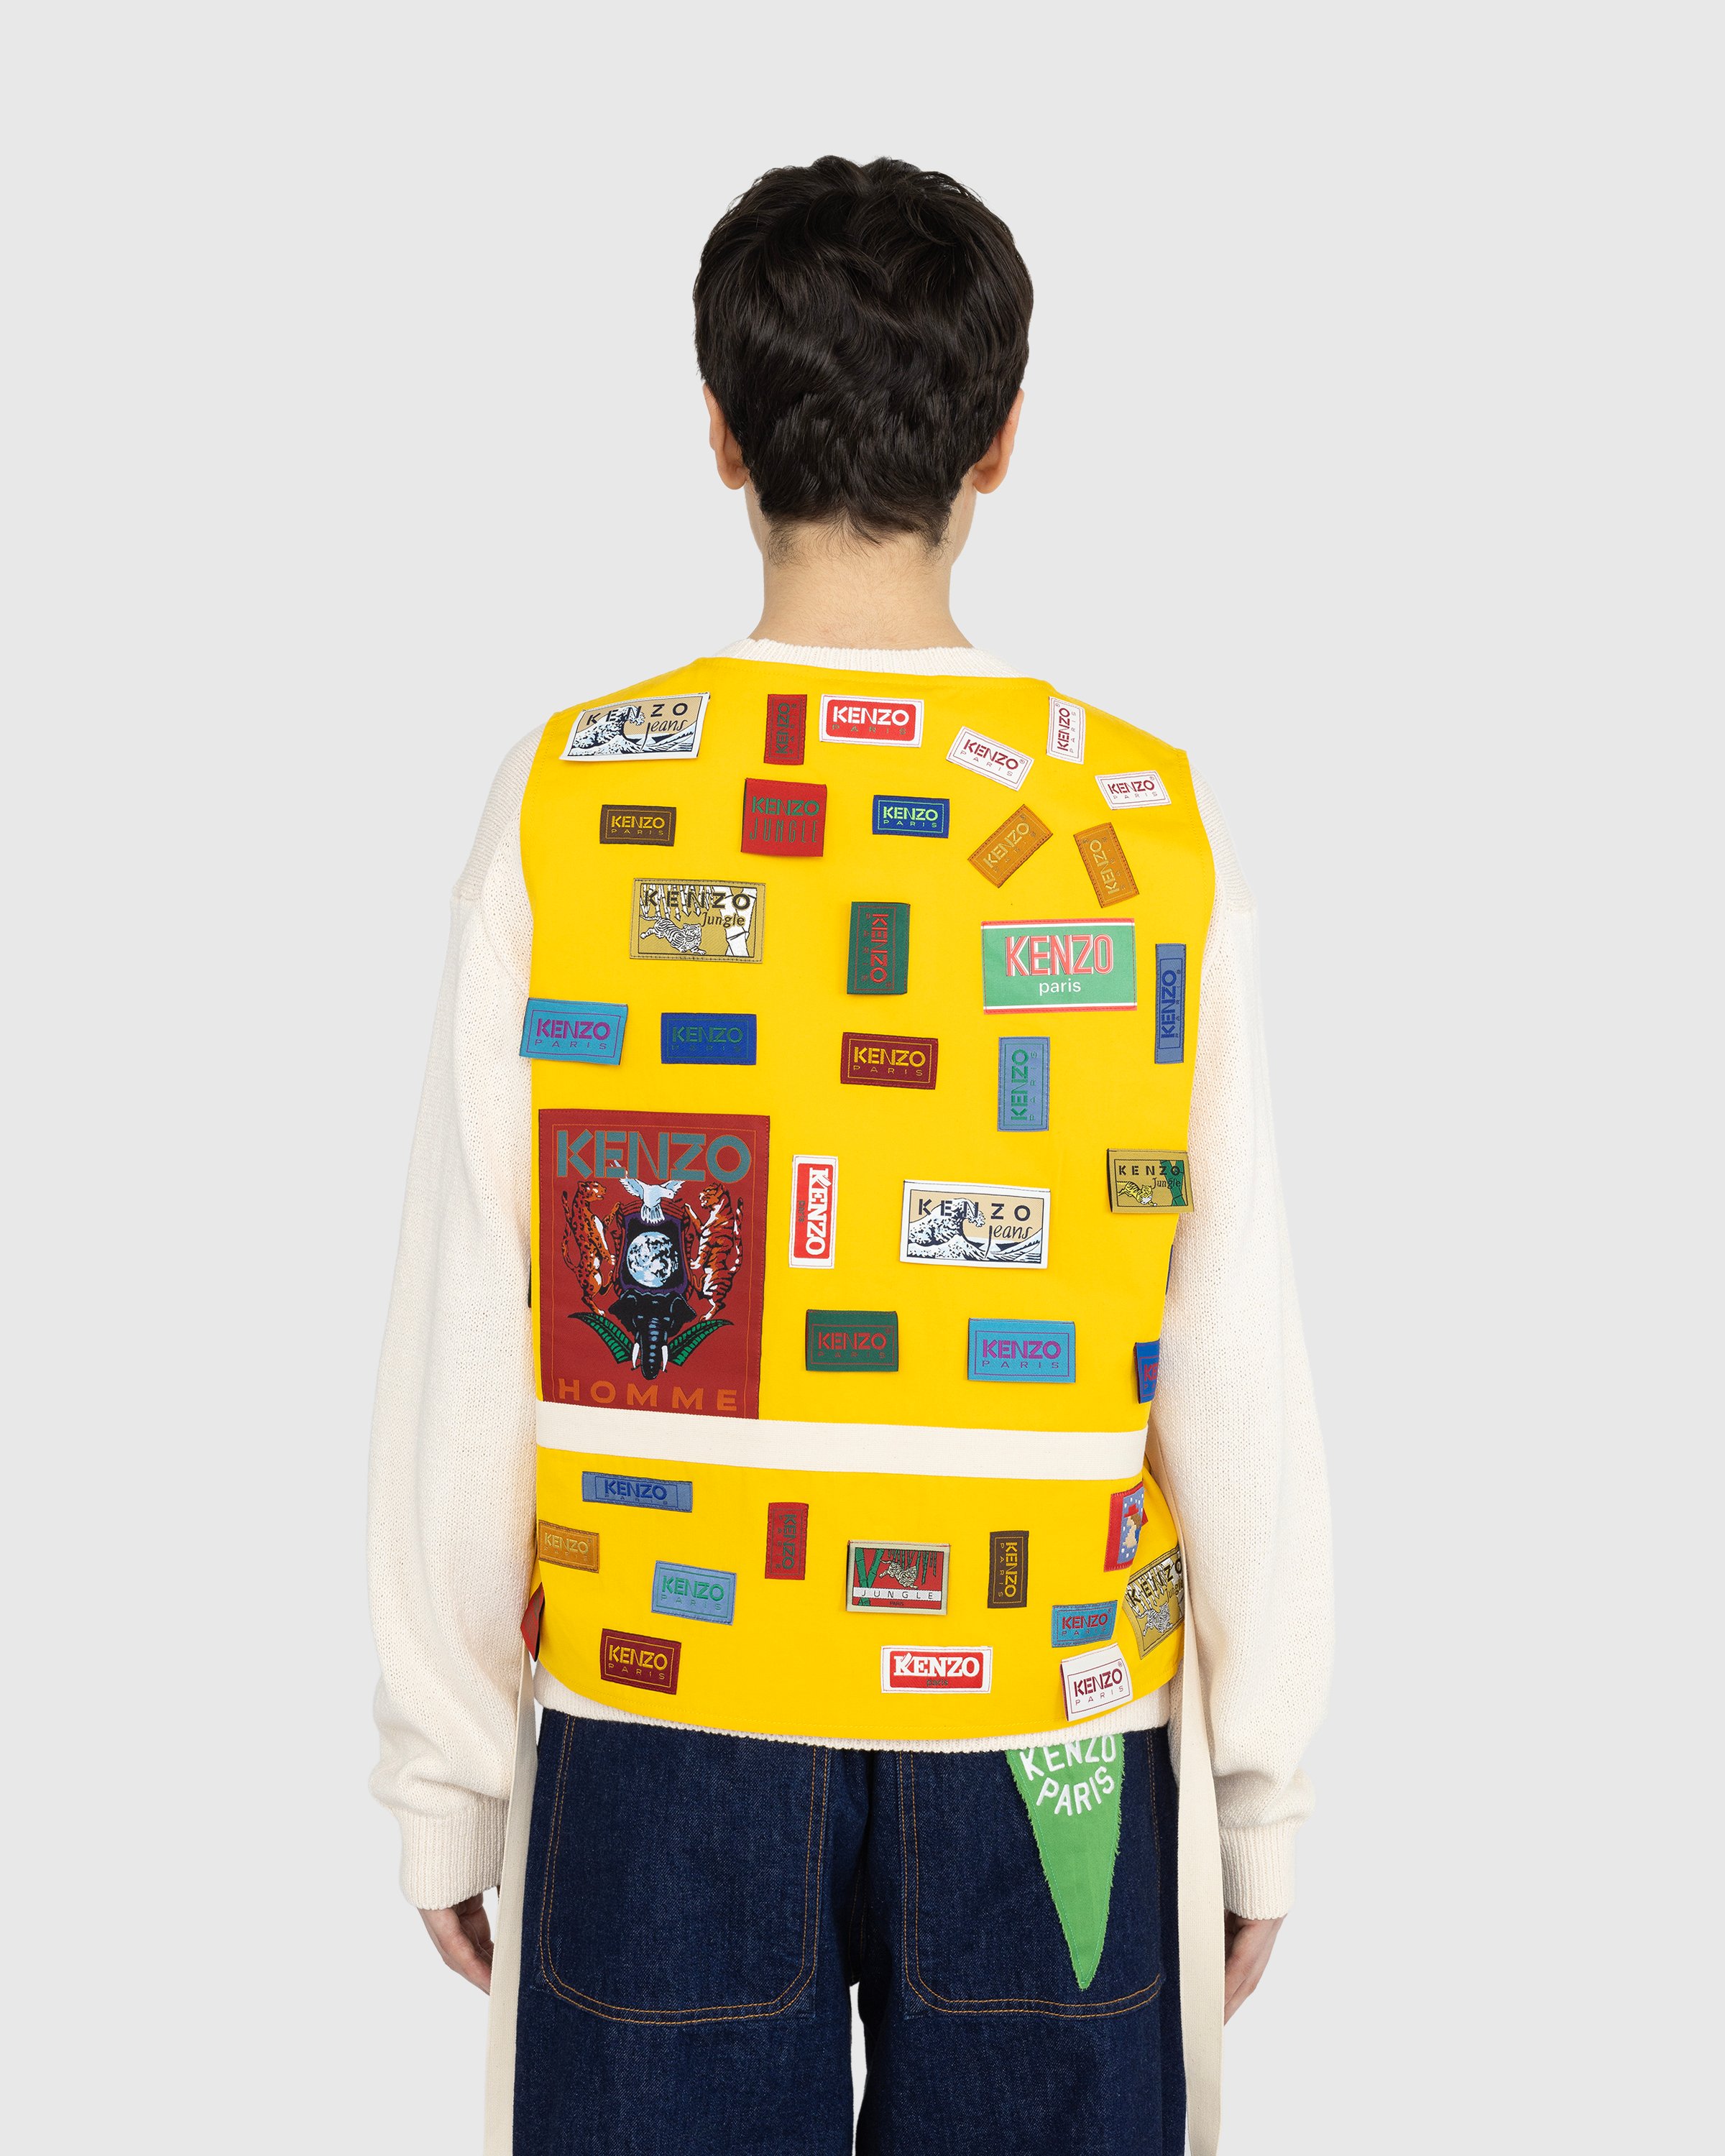 Kenzo - ‘Archives Labels’ Vest - Clothing - Yellow - Image 4